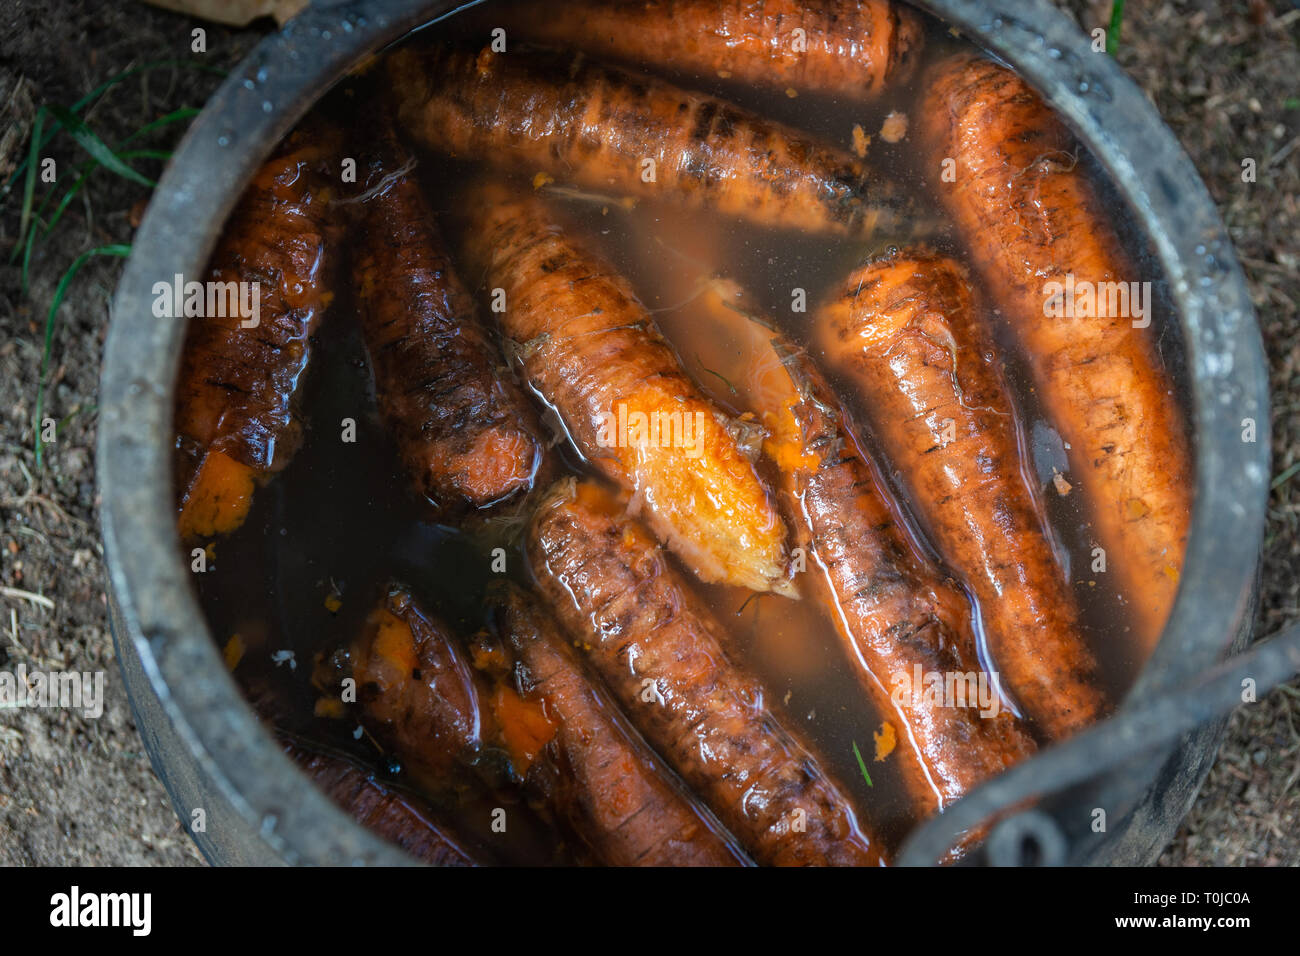 Dirty carrot vegetables in a vintage metal bucket filled with water just to wash up the food ingredients before cooking Stock Photo